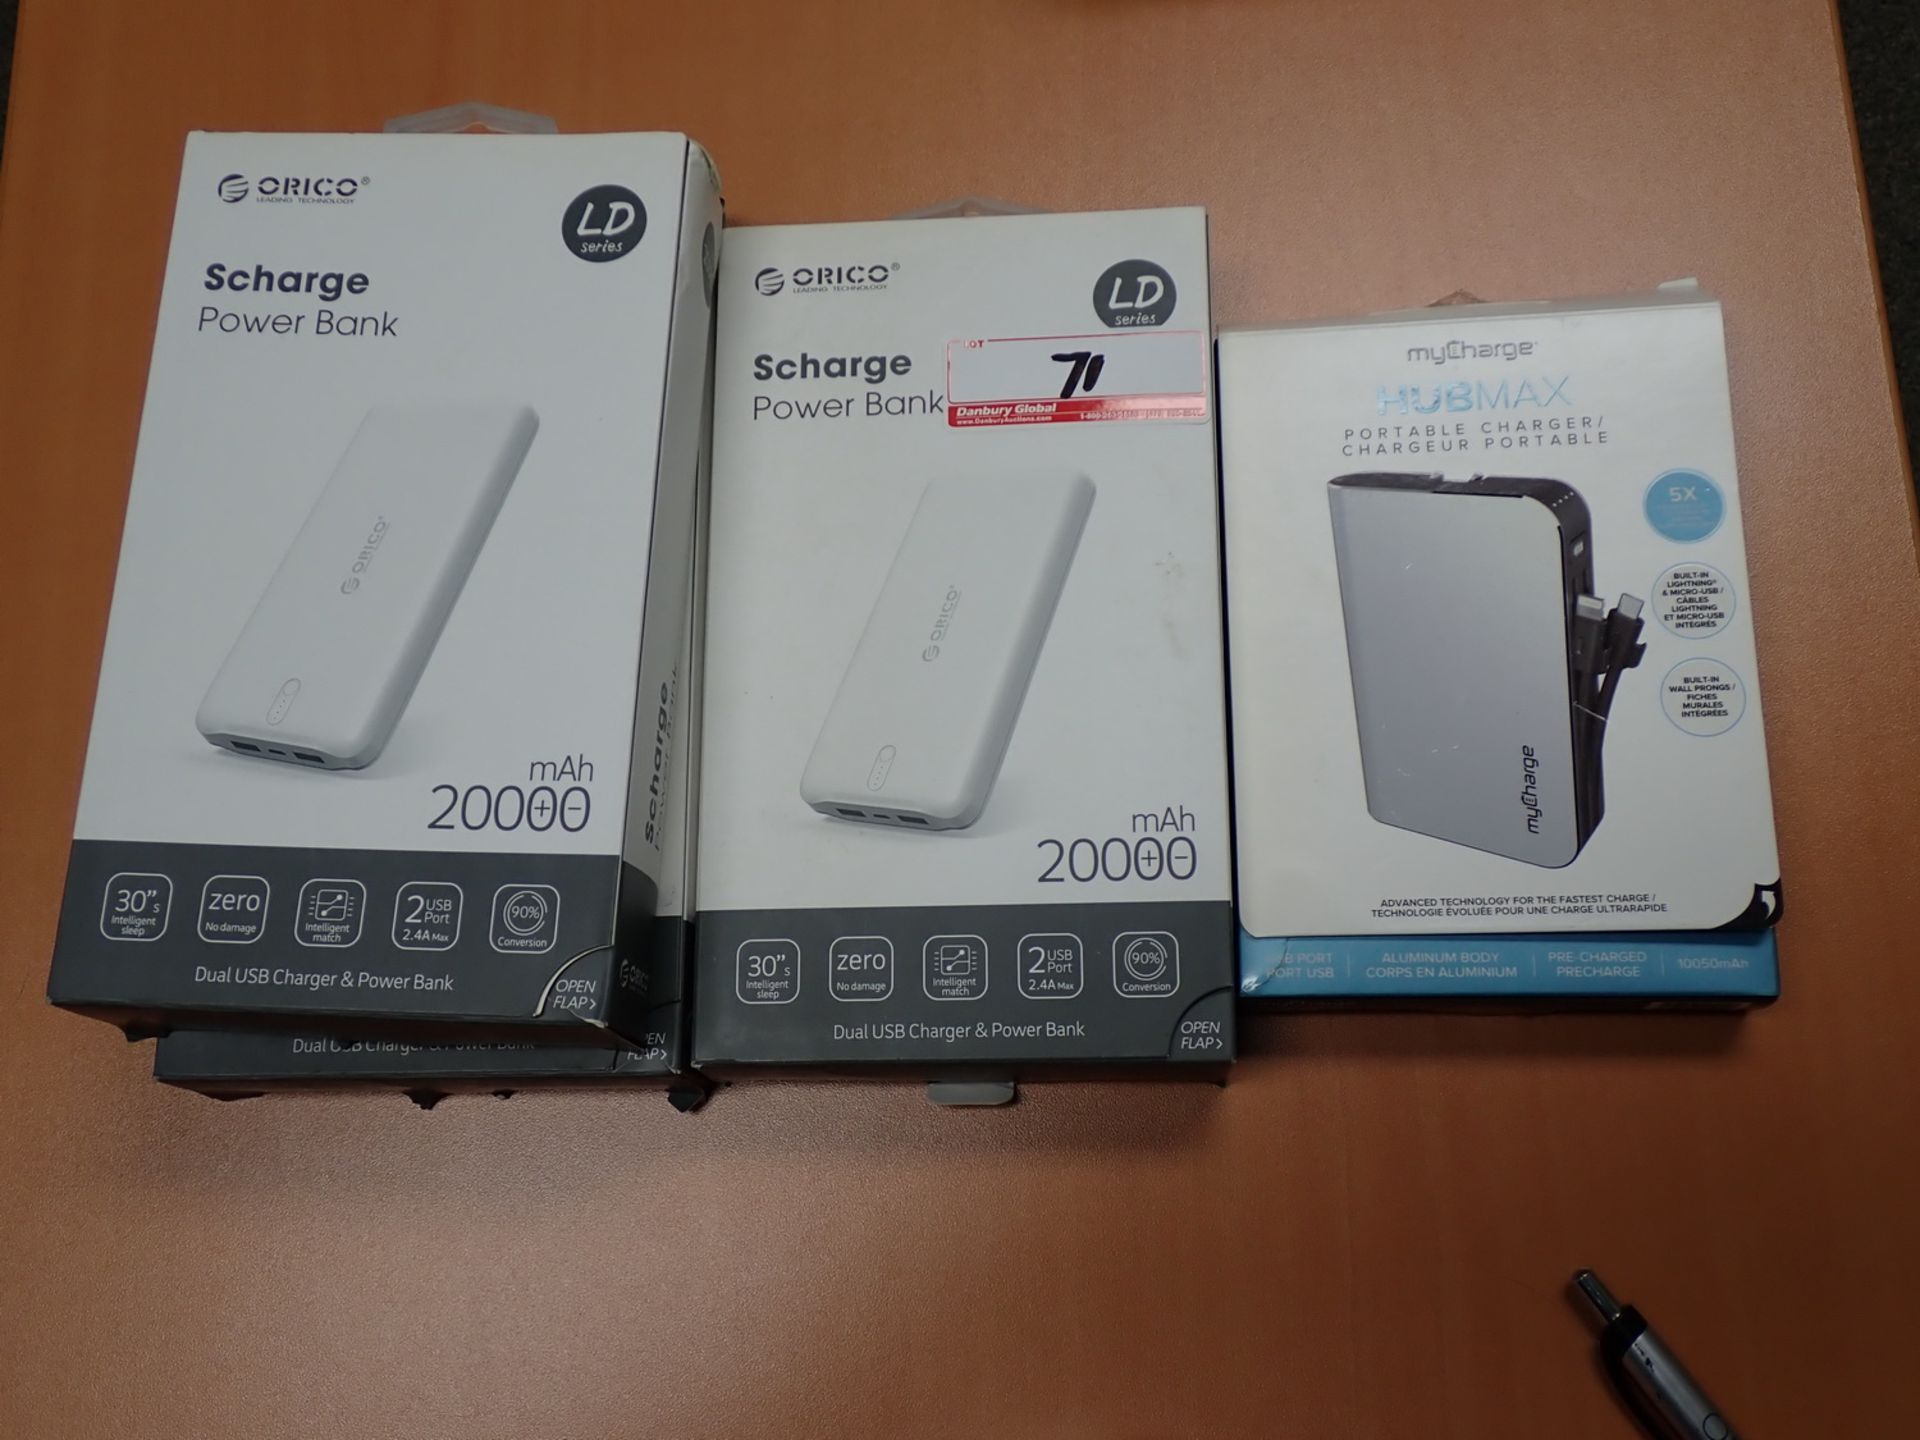 LOT - ORICO SCHARGE 20,000MAH POWER BANKS & HUBMAX MYCHARGE 10,500MAH PORTABLE CHARGER